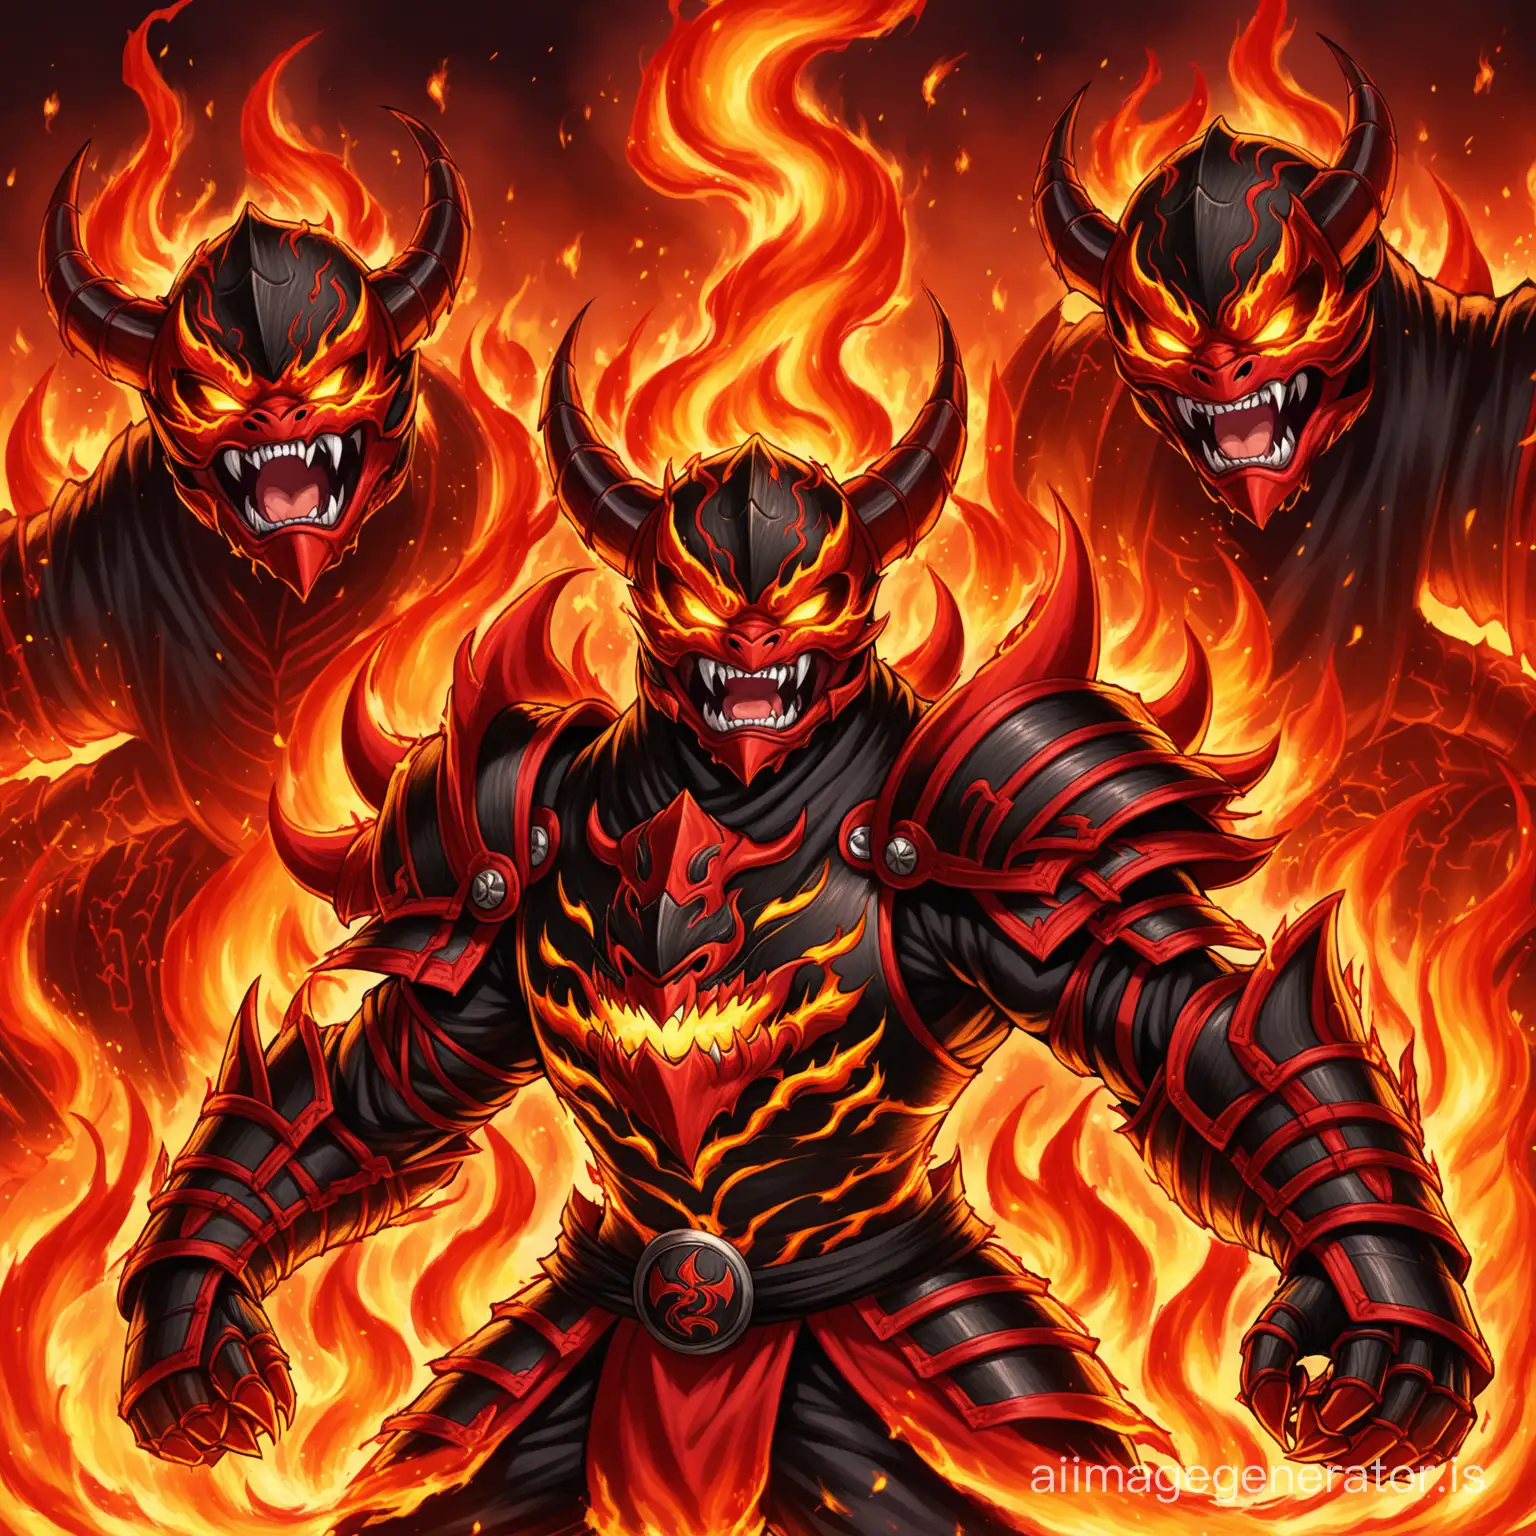 red sab zero, mortal combat, fiery demon-ninja, mask in the form of a roaring mouth with fangs, fiery demon, fiery eyes, covered in flames, burning demon, evil demon, fiery ninja, chitinous armor, lava veins on armor